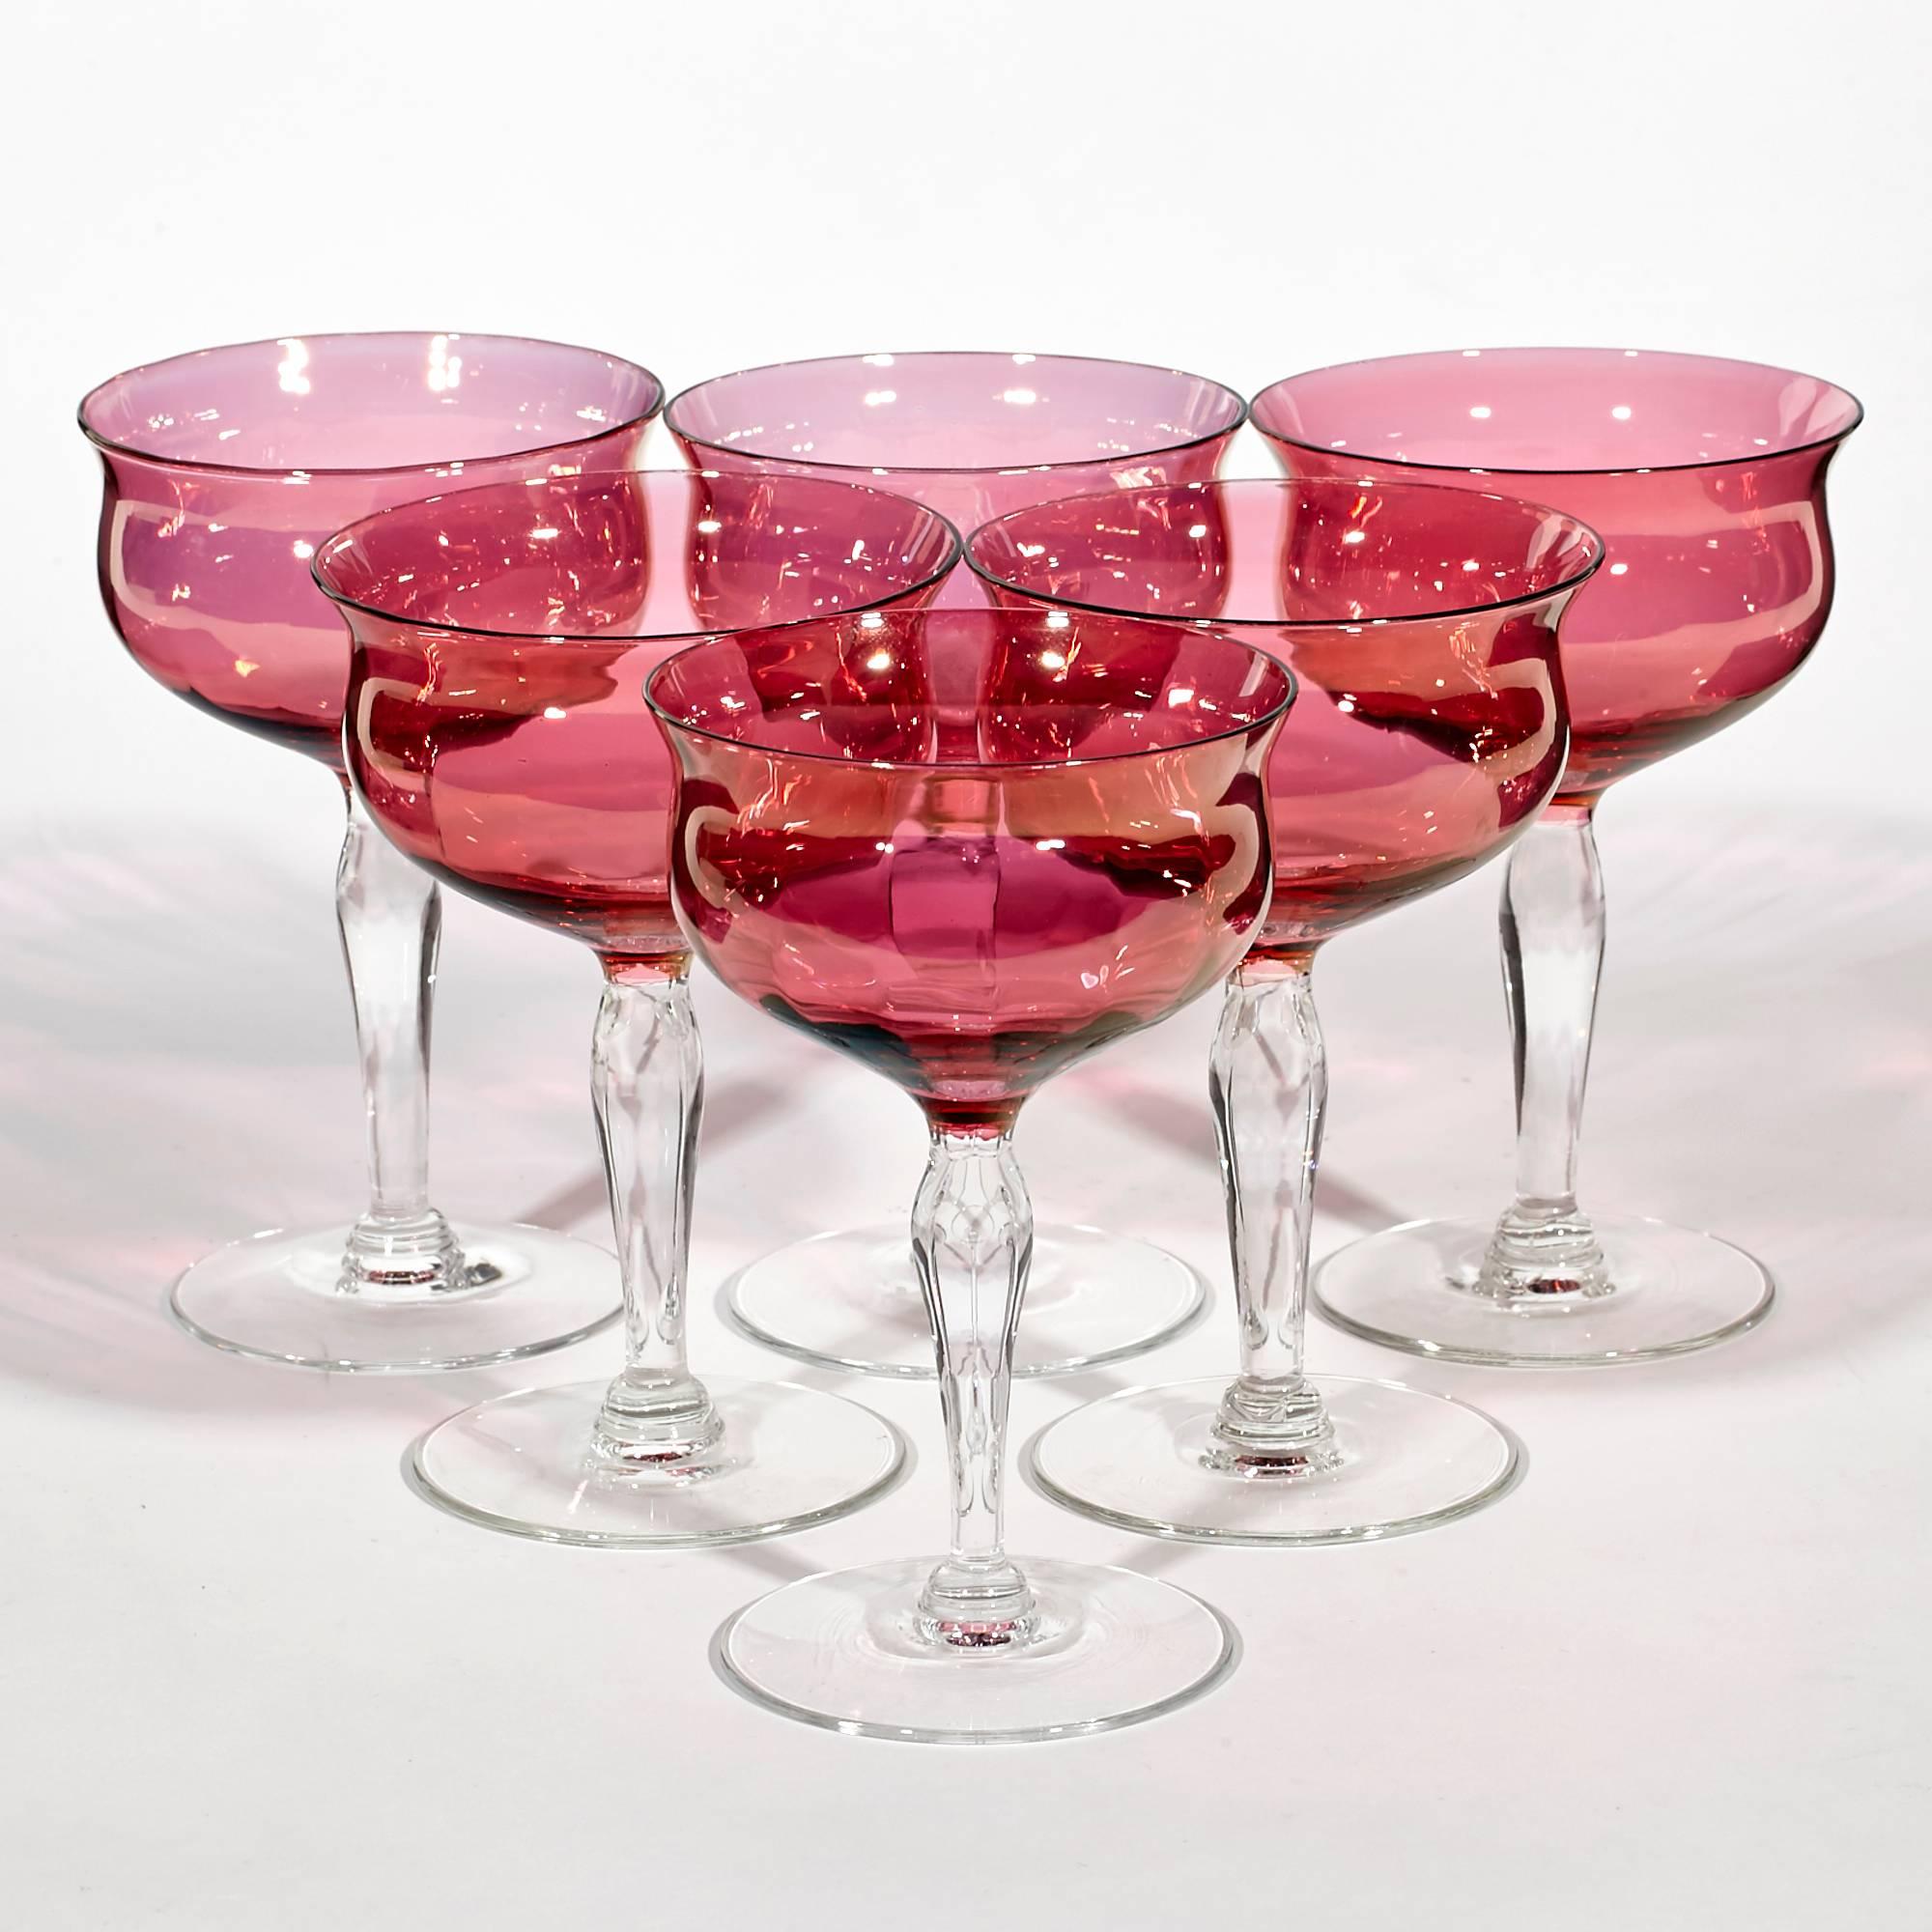 Vintage 1960s set of six cranberry glass bowl and clear stem glass coupe stems.